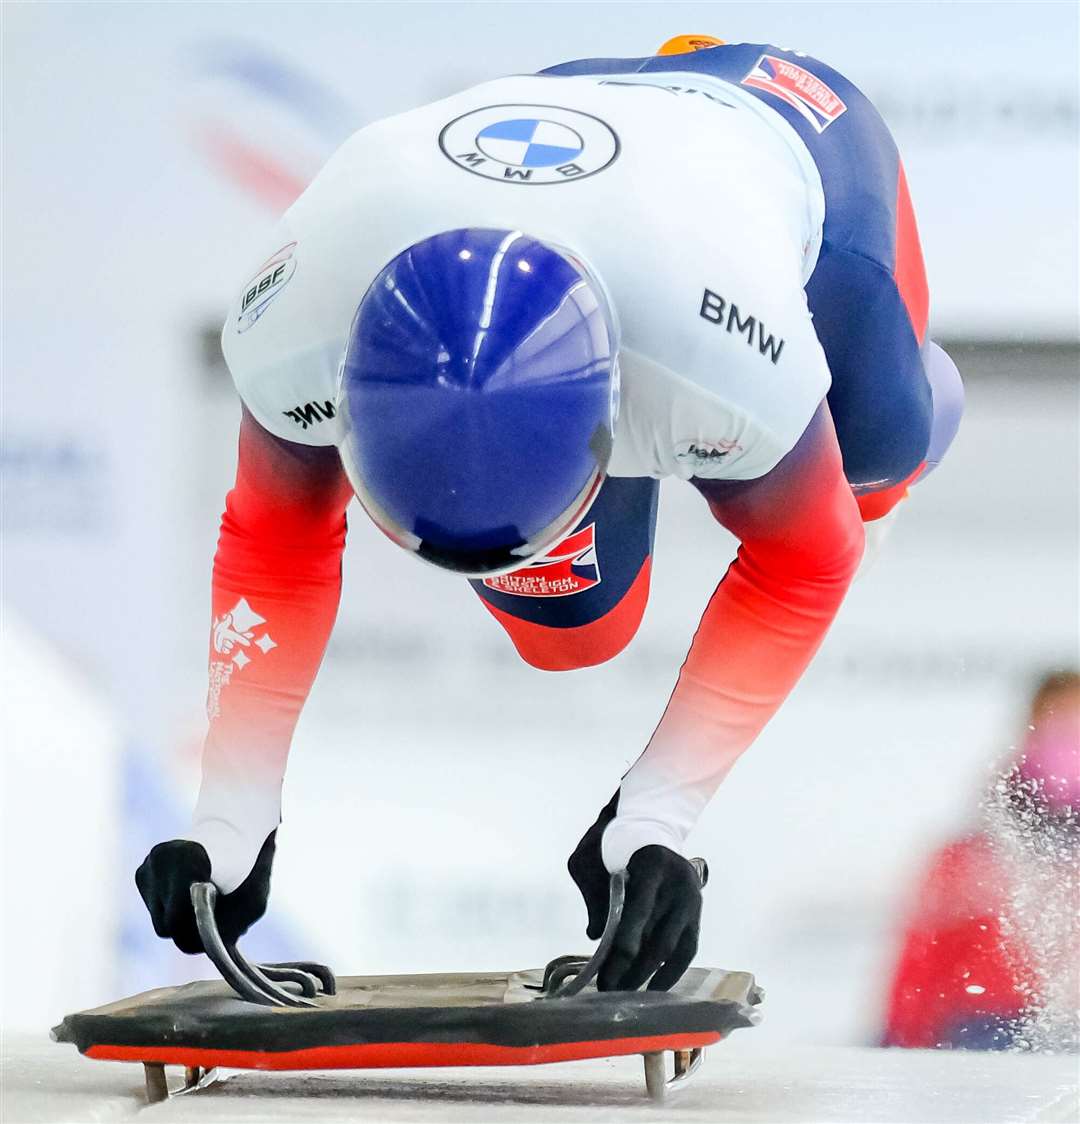 Matt Weston is getting his first taste of Olympic competition in Beijing. Picture: www.imago-images.de